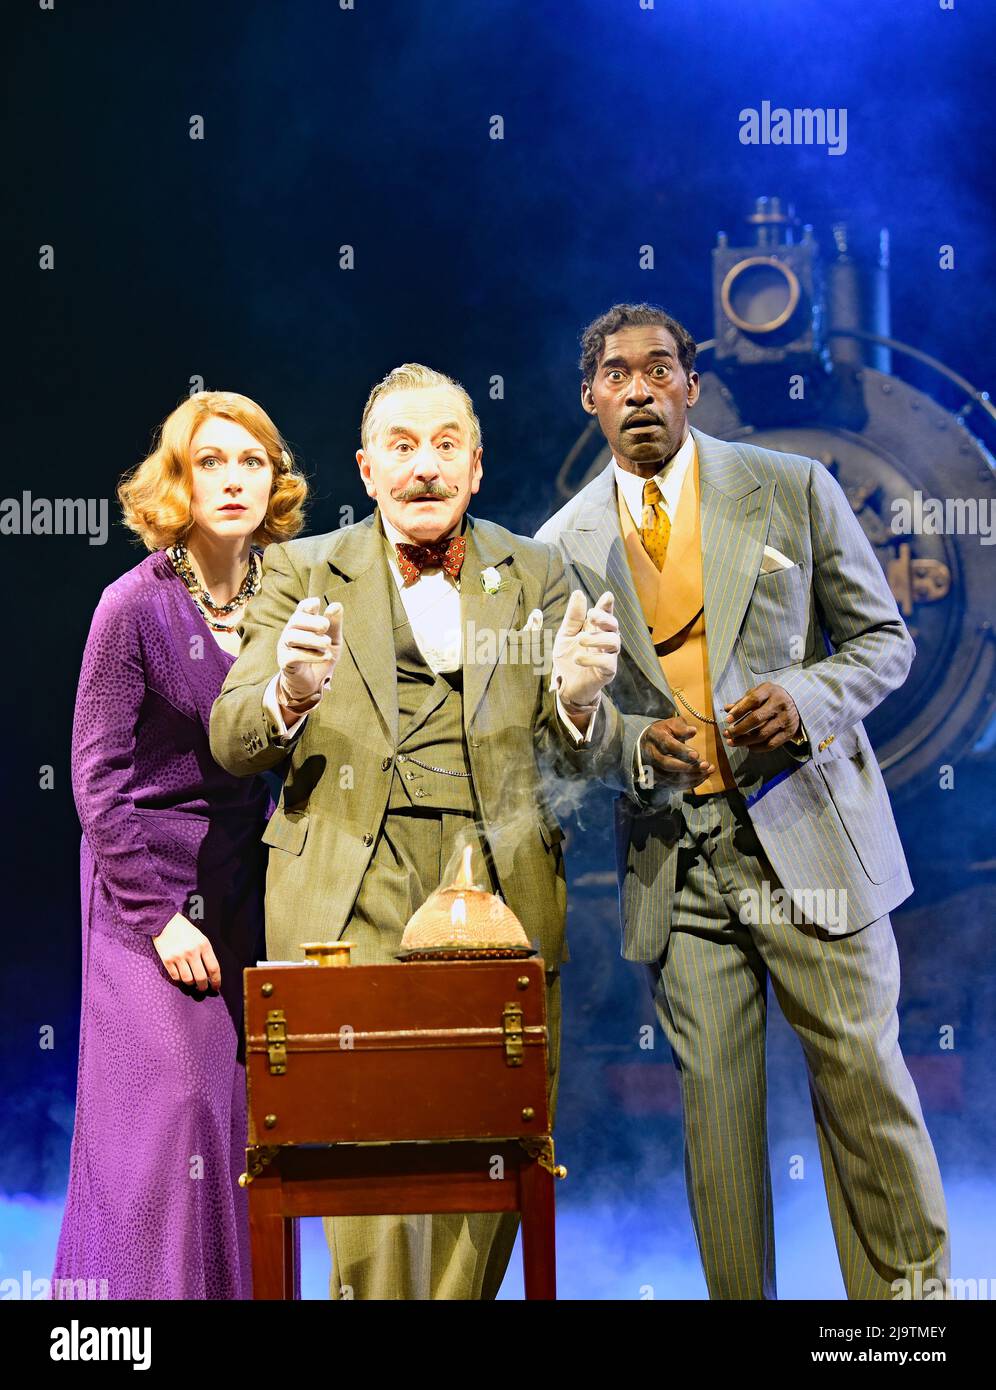 Left to right: Laura Rogers (Countess Andrenyi), Henry Goodman (Hercule Poirot), Patrick Robinson (Monsieur Bouc) in Murder on the Orient Express... Stock Photo